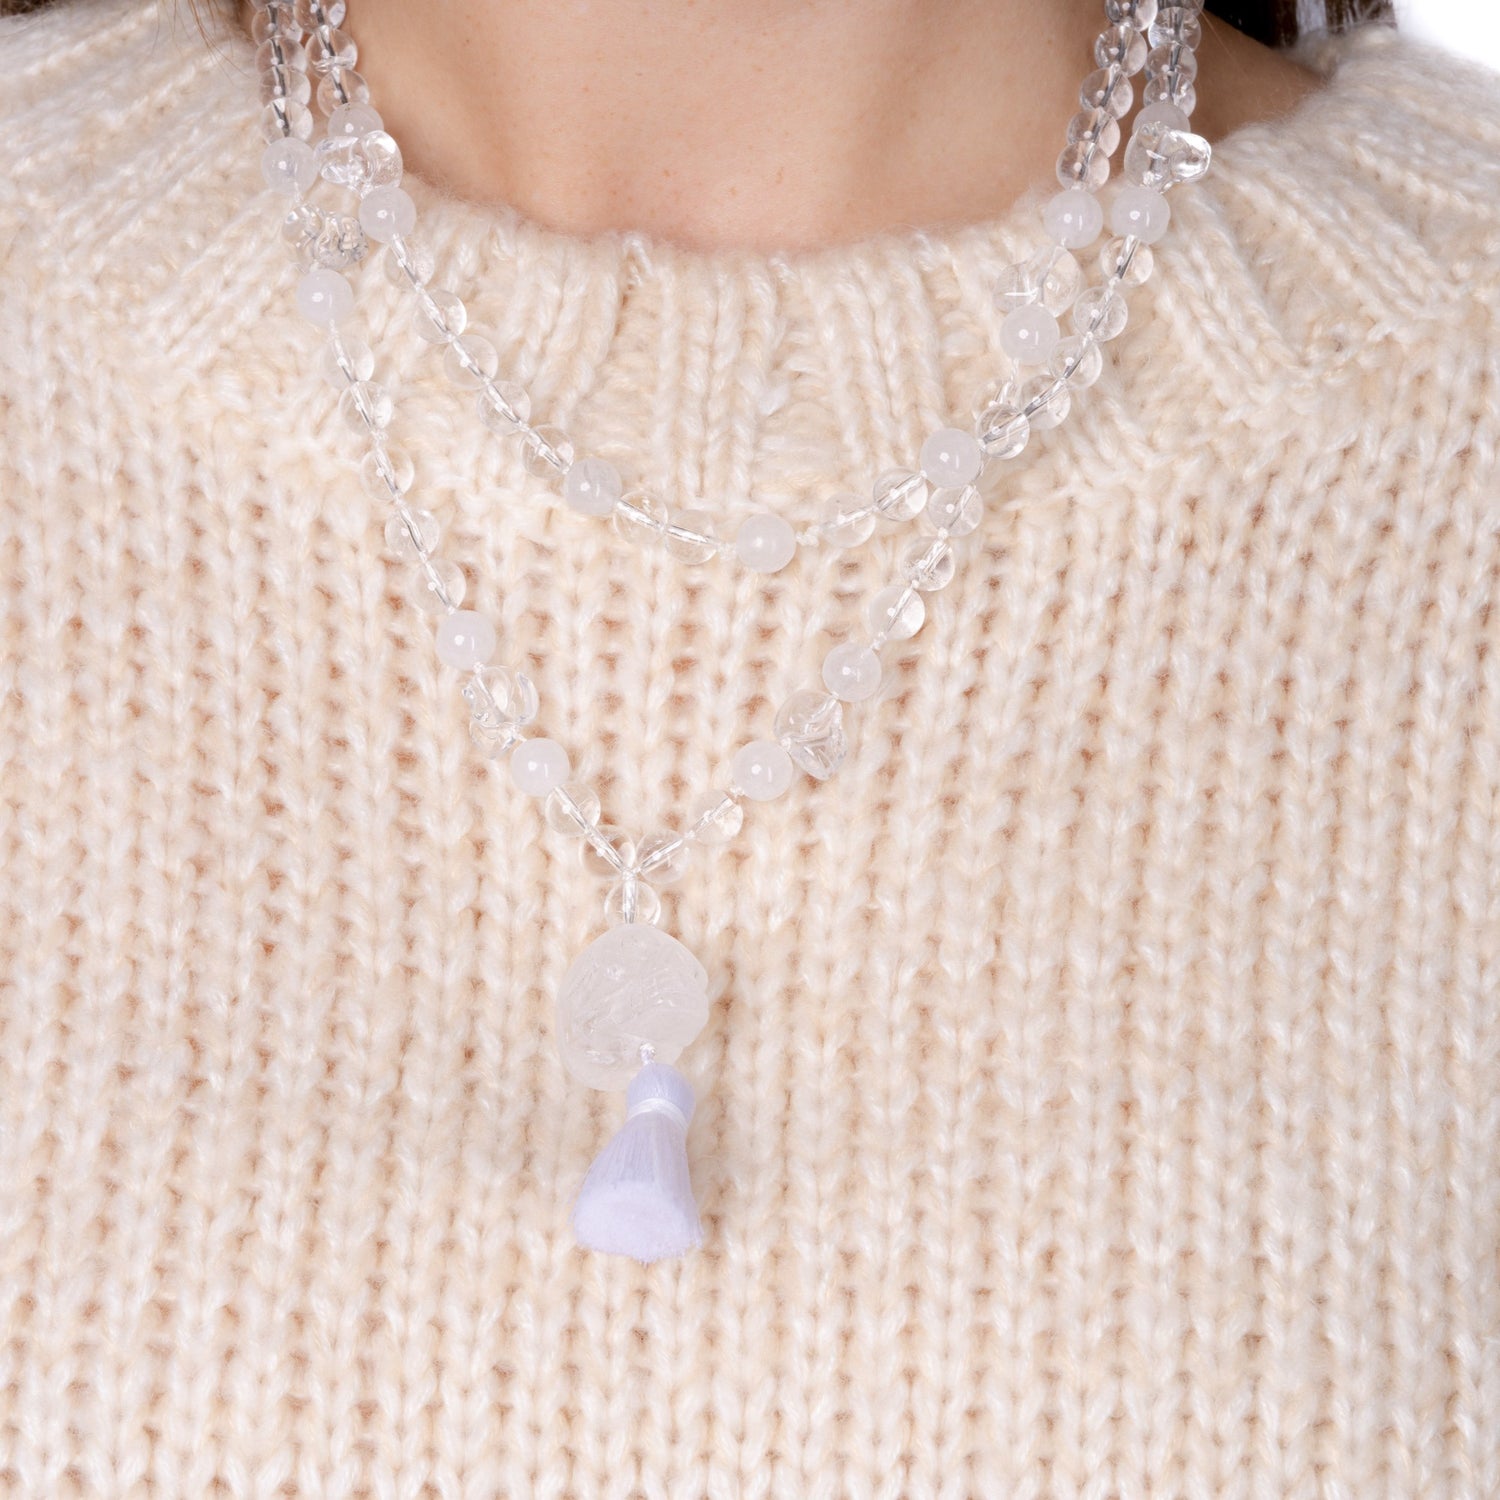 Crystal Quartz Mala Necklace, worn in two layers, on Woman